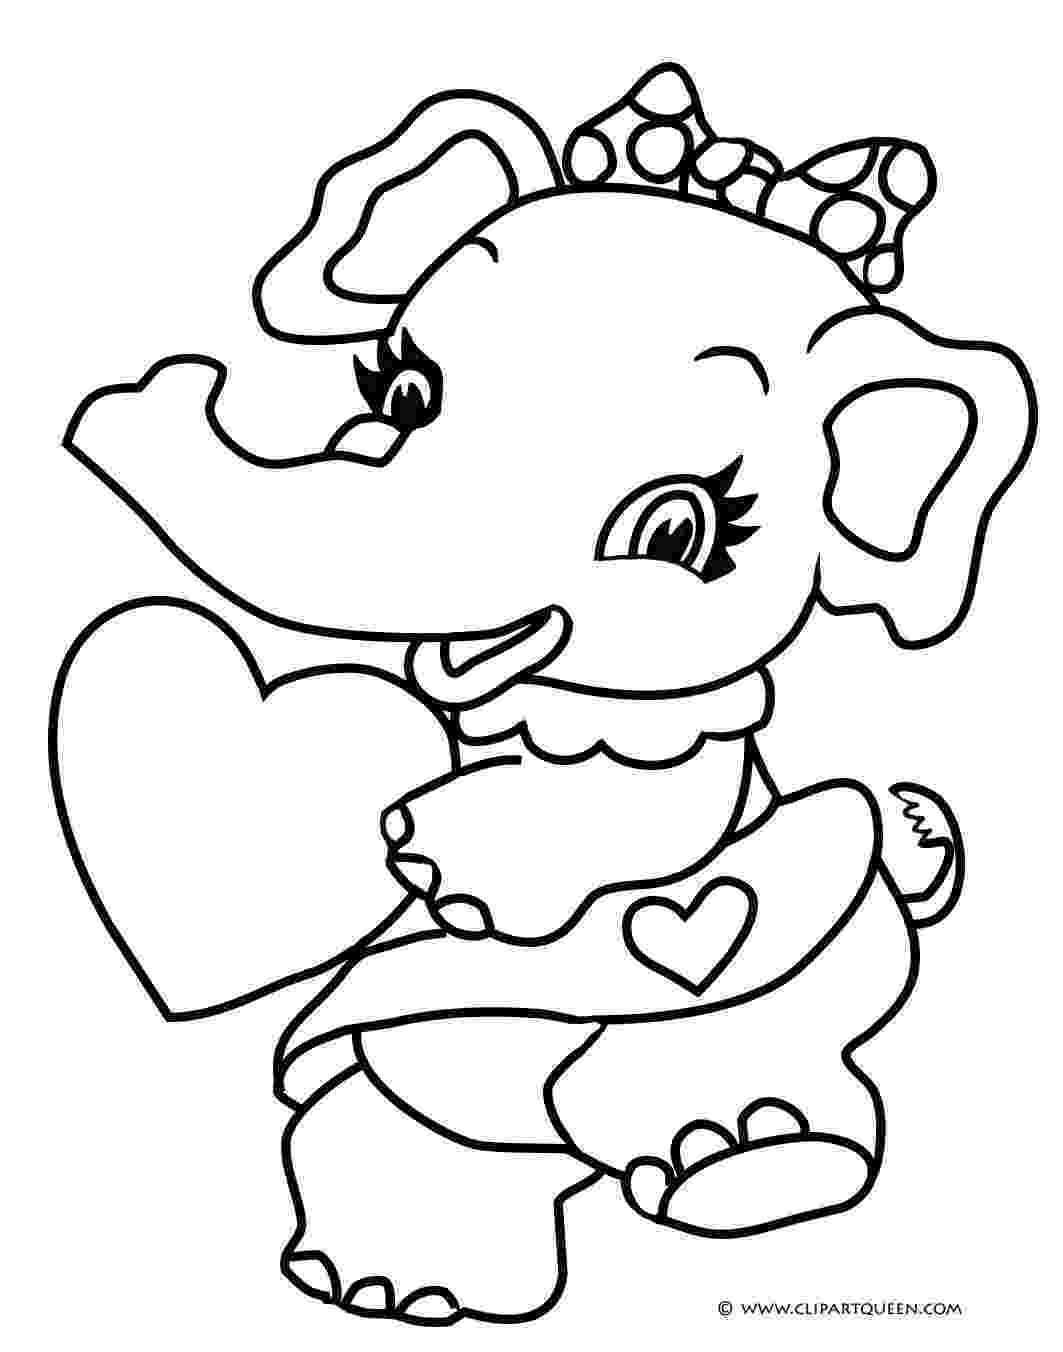 valentines day hearts coloring pages 29 valentines day coloring pages to print for kids sheknows pages coloring hearts valentines day 